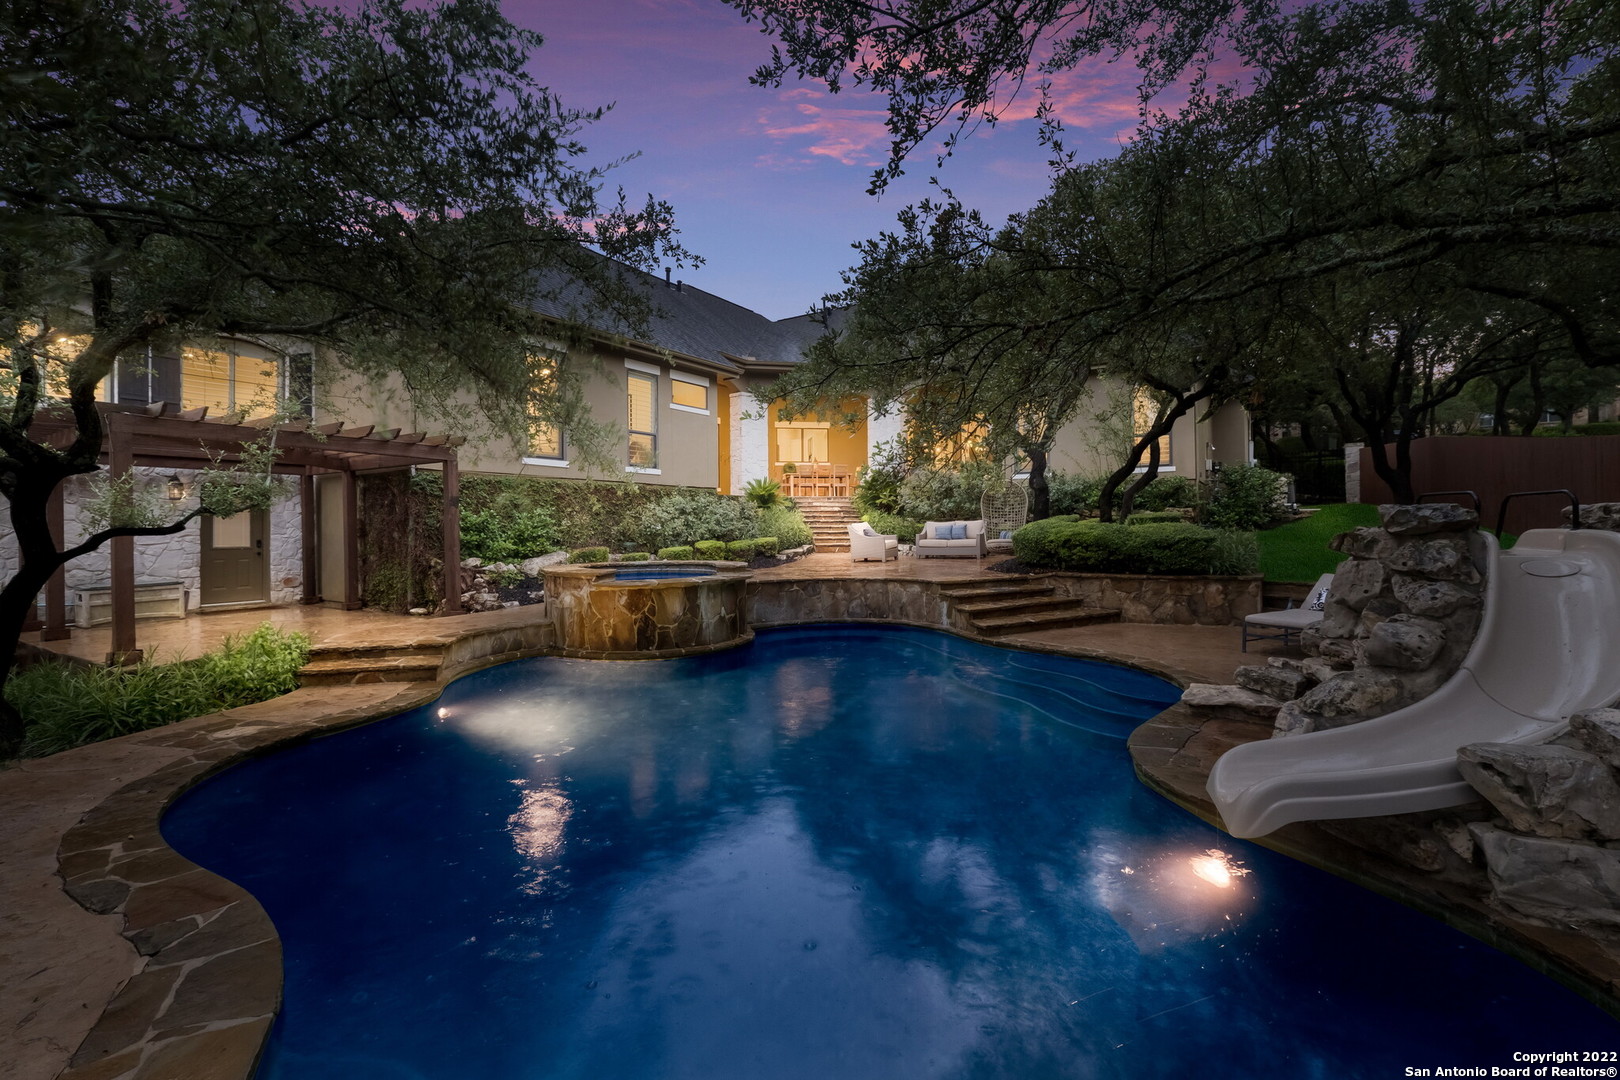 FALL IN LOVE with this beautifully remodeled one-story home in the exclusive guarded community of Summerglen. The quality and craftsmanship of the home are unparalleled as this was the former personal home of a renowned San Antonio custom home builder. The brilliant floor plan and timeless design provide the perfect balance of luxury, functionality, and entertainment. The versatile layout features a dining room, bonus room/work area, generous game room, and all ensuite bedrooms. The foyer resembles a luxury hotel with an impressive iron door, flawless design, tin barrel ceiling, & large picture windows to the backyard. The extraordinary kitchen features Thermador and Viking appliances, beverage drawers, a coveted nugget ice machine, a built-in refrigerator, custom cabinetry & quartz countertops. The gorgeous family room exudes elegance and simplicity without sacrificing comfort. The luxurious primary suite is breathtaking.  The luxe bathroom displays a grand chandelier, stone accent wall, soaking tub, coffee bar area, oversized shower, and a remarkable custom closet designed by California Closets. In addition to the kitchen, family room, garage, and all the bathrooms, the remodel included new wood flooring, new countertops, new light fixtures, new plumbing fixtures, replaced two AC units, new electrical outlets, a new full house generator, new water softener & so much more. Enjoy the park-like backyard retreat with a heated pool with waterslide & spa, multiple entertaining spaces, mosquito mister system, a sports court, an outdoor kitchen, and an outdoor fire pit. The four-car garage with epoxy flooring features two Tesla chargers, and tons of storage and it will hold all your toys including a boat & RV. Simply breathtaking.